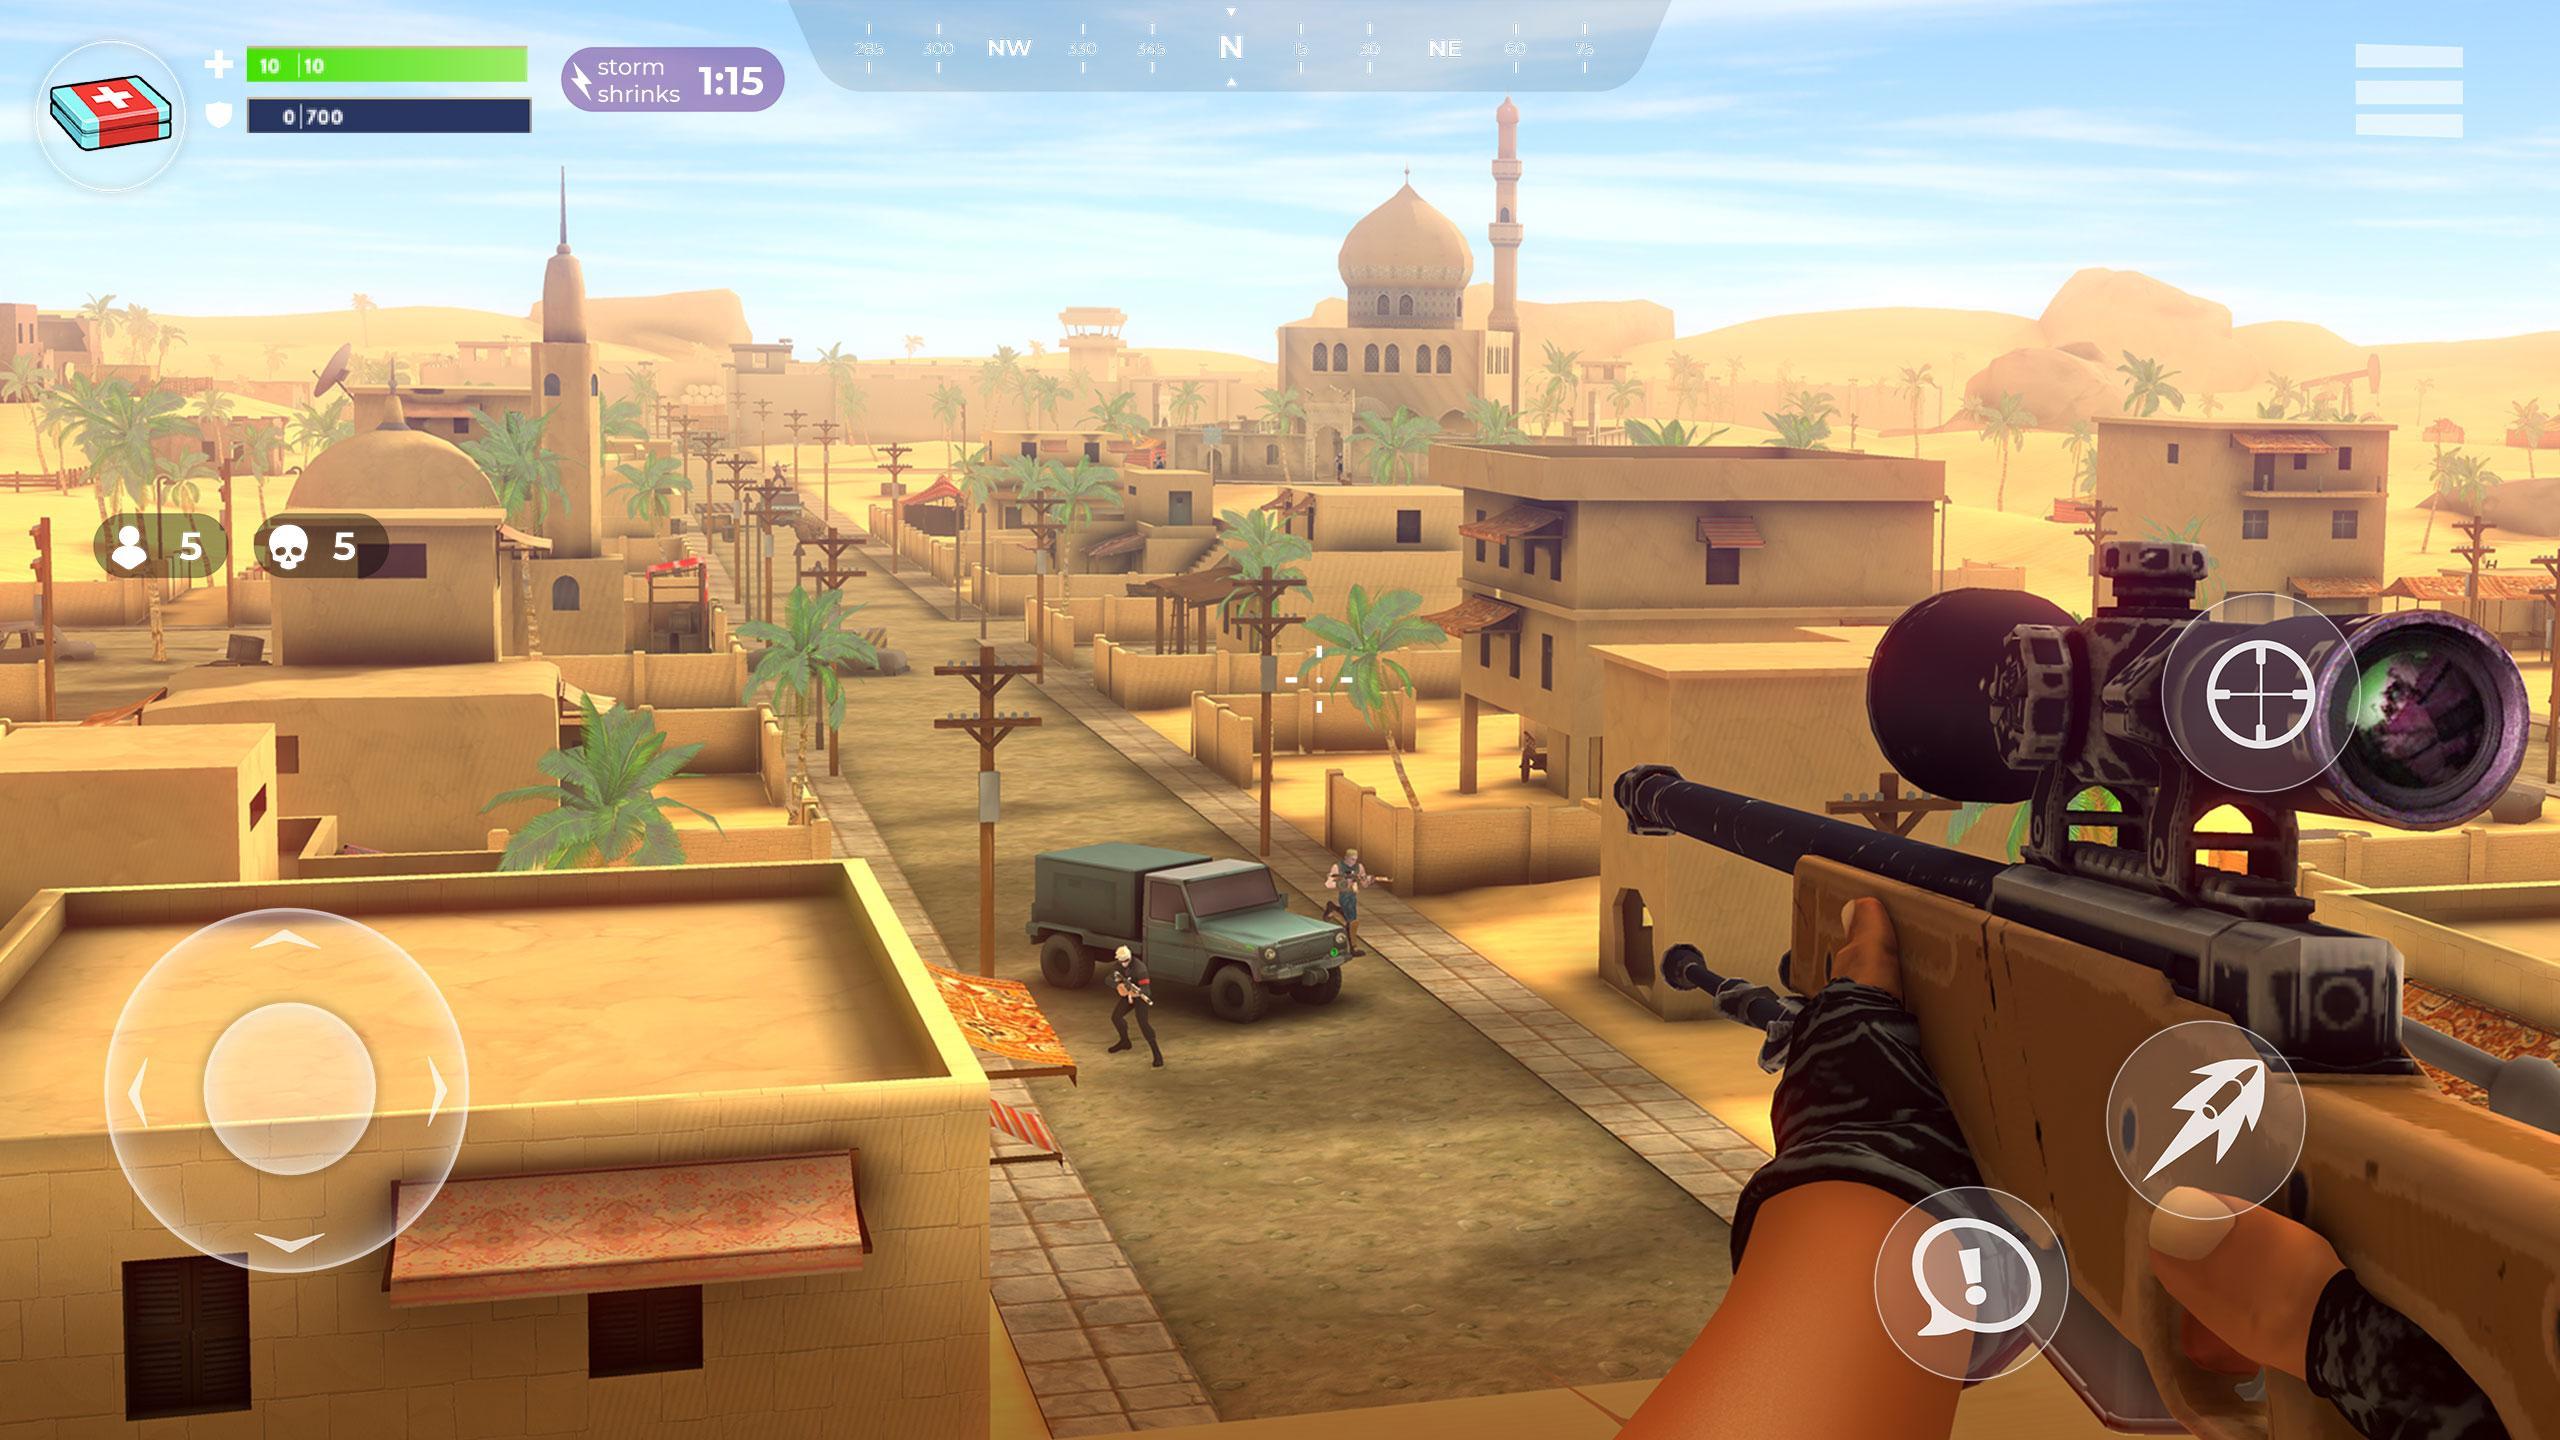 FightNight Battle Royale: FPS Shooter for Android - APK Download - 